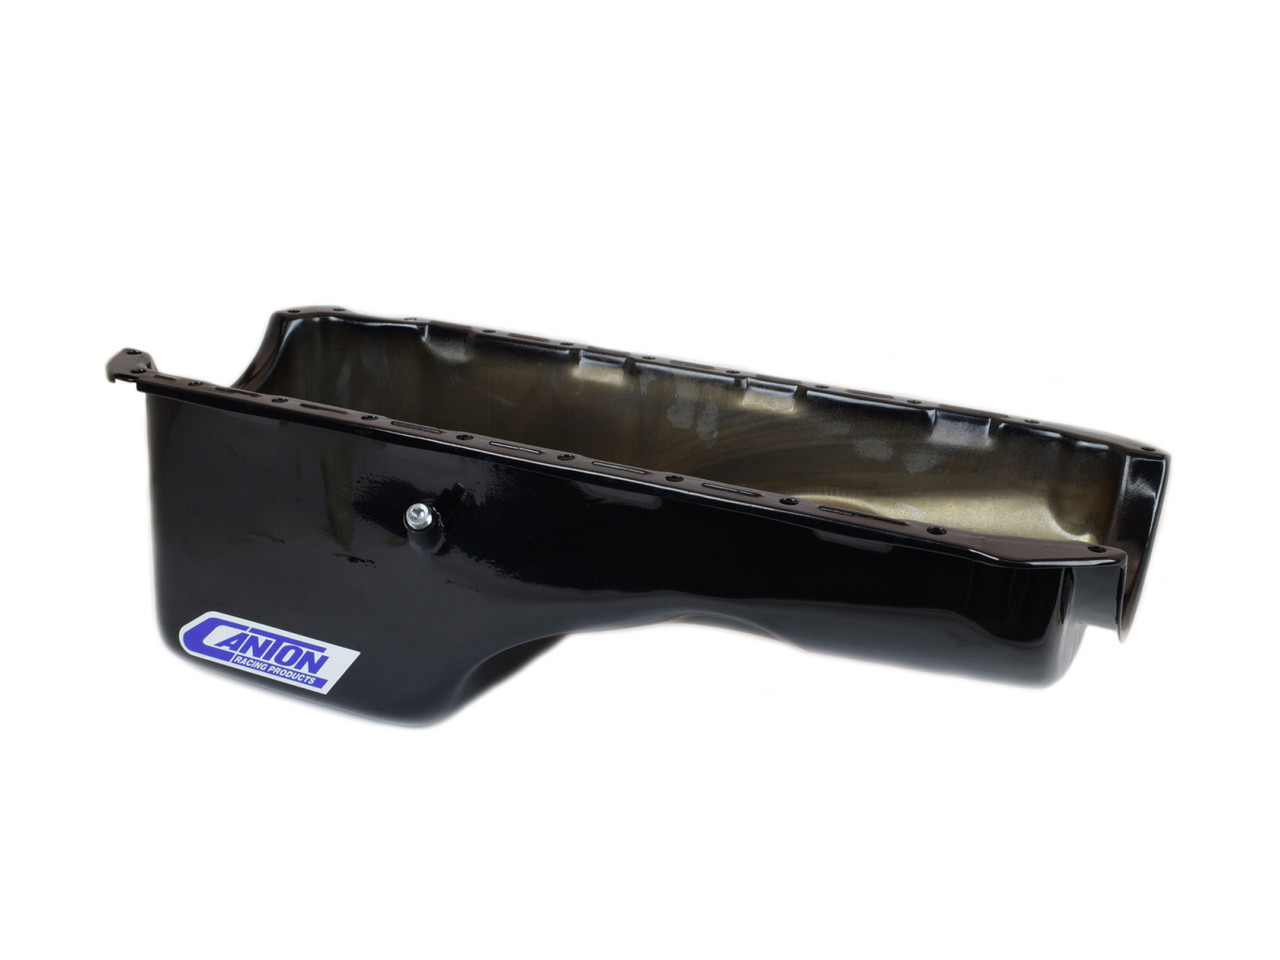 Canton 15-300BLK Oil Pan For Big Block Chevy Mark 4 Stock Replacement Oil Pan (CRP-15-300BLK)